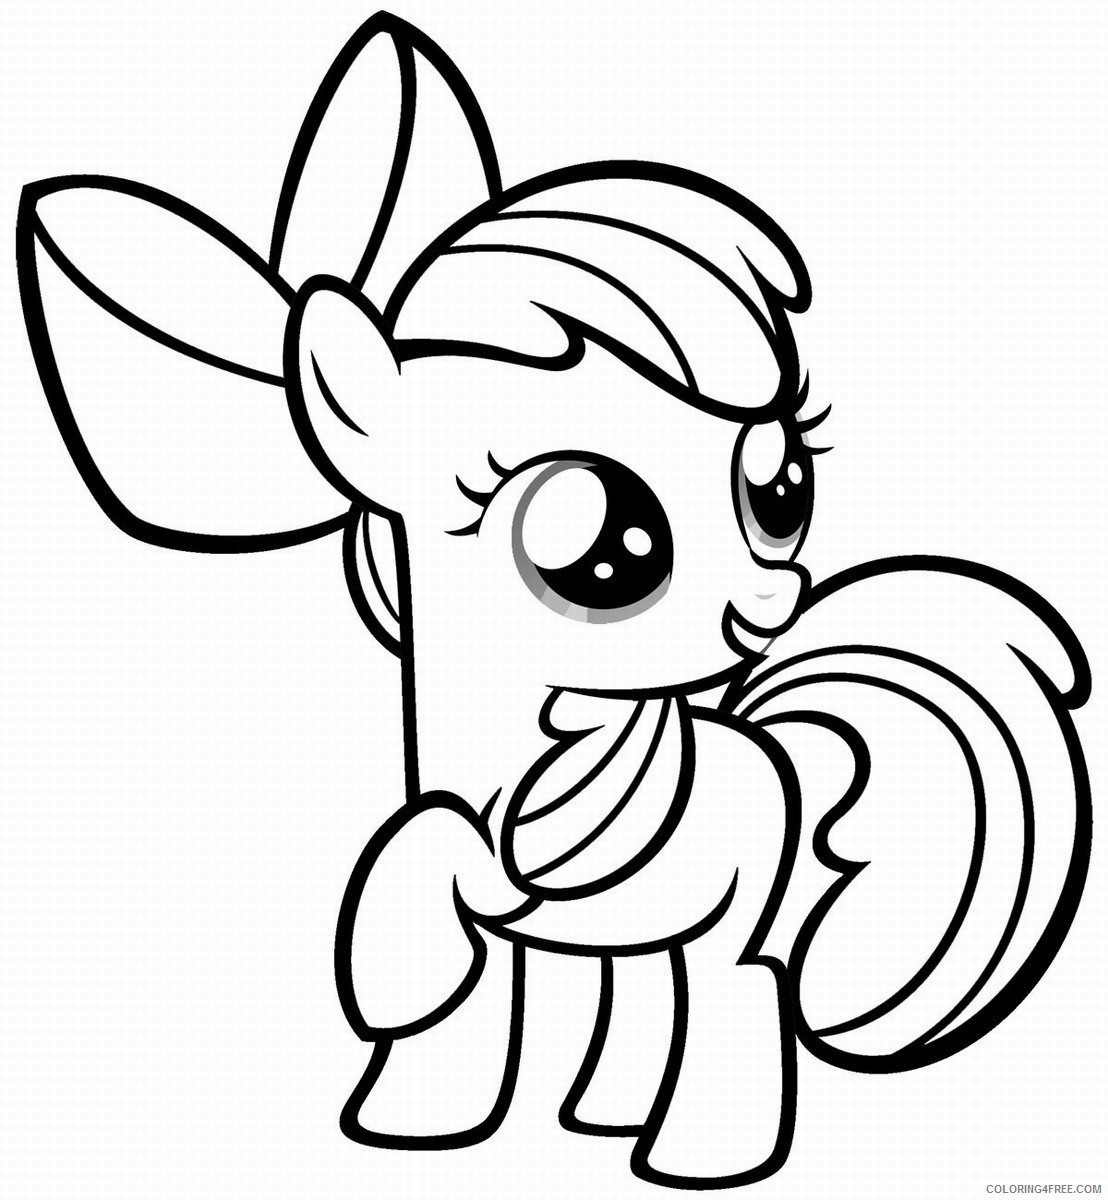 My Little Pony Coloring Pages Cartoons my little pony 21 Printable 2020 4467 Coloring4free